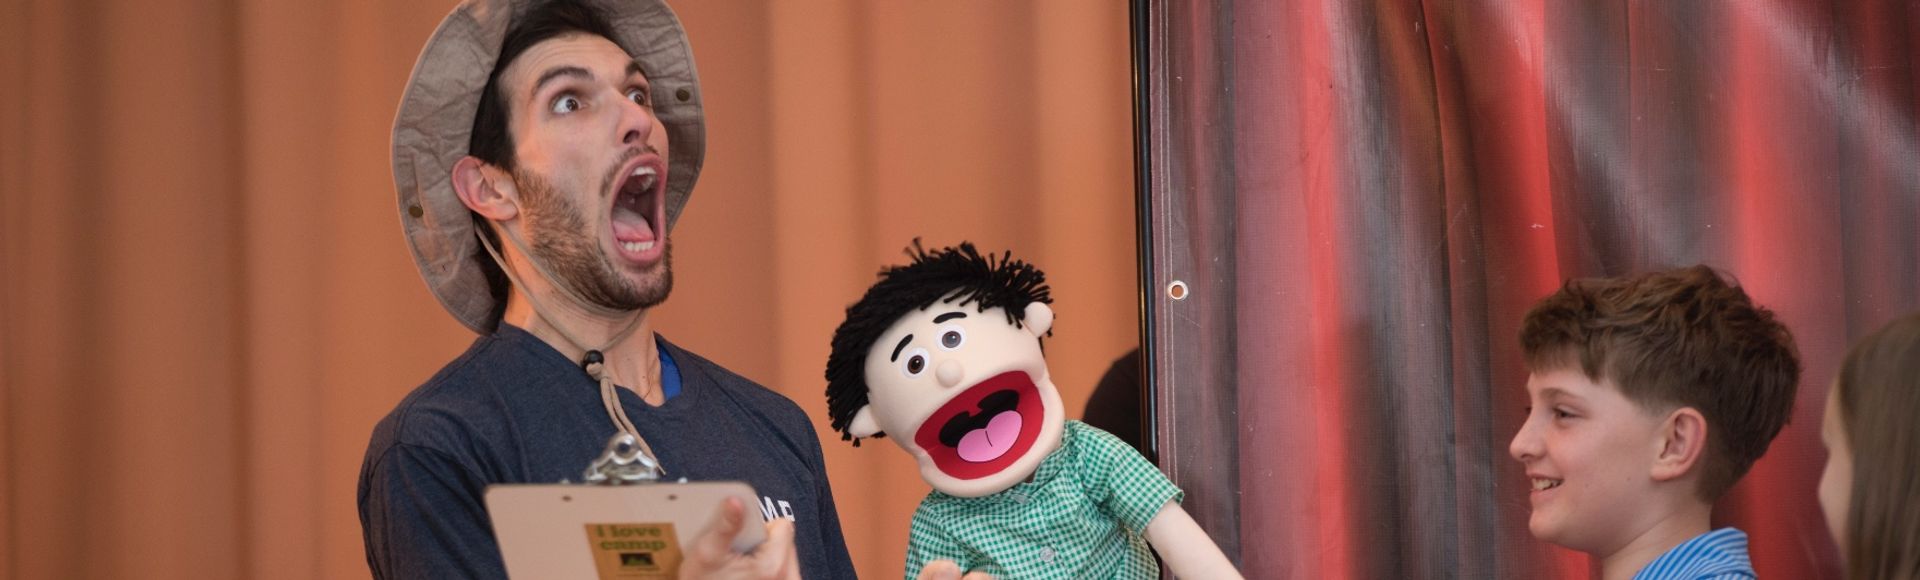 A puppet making someone laugh